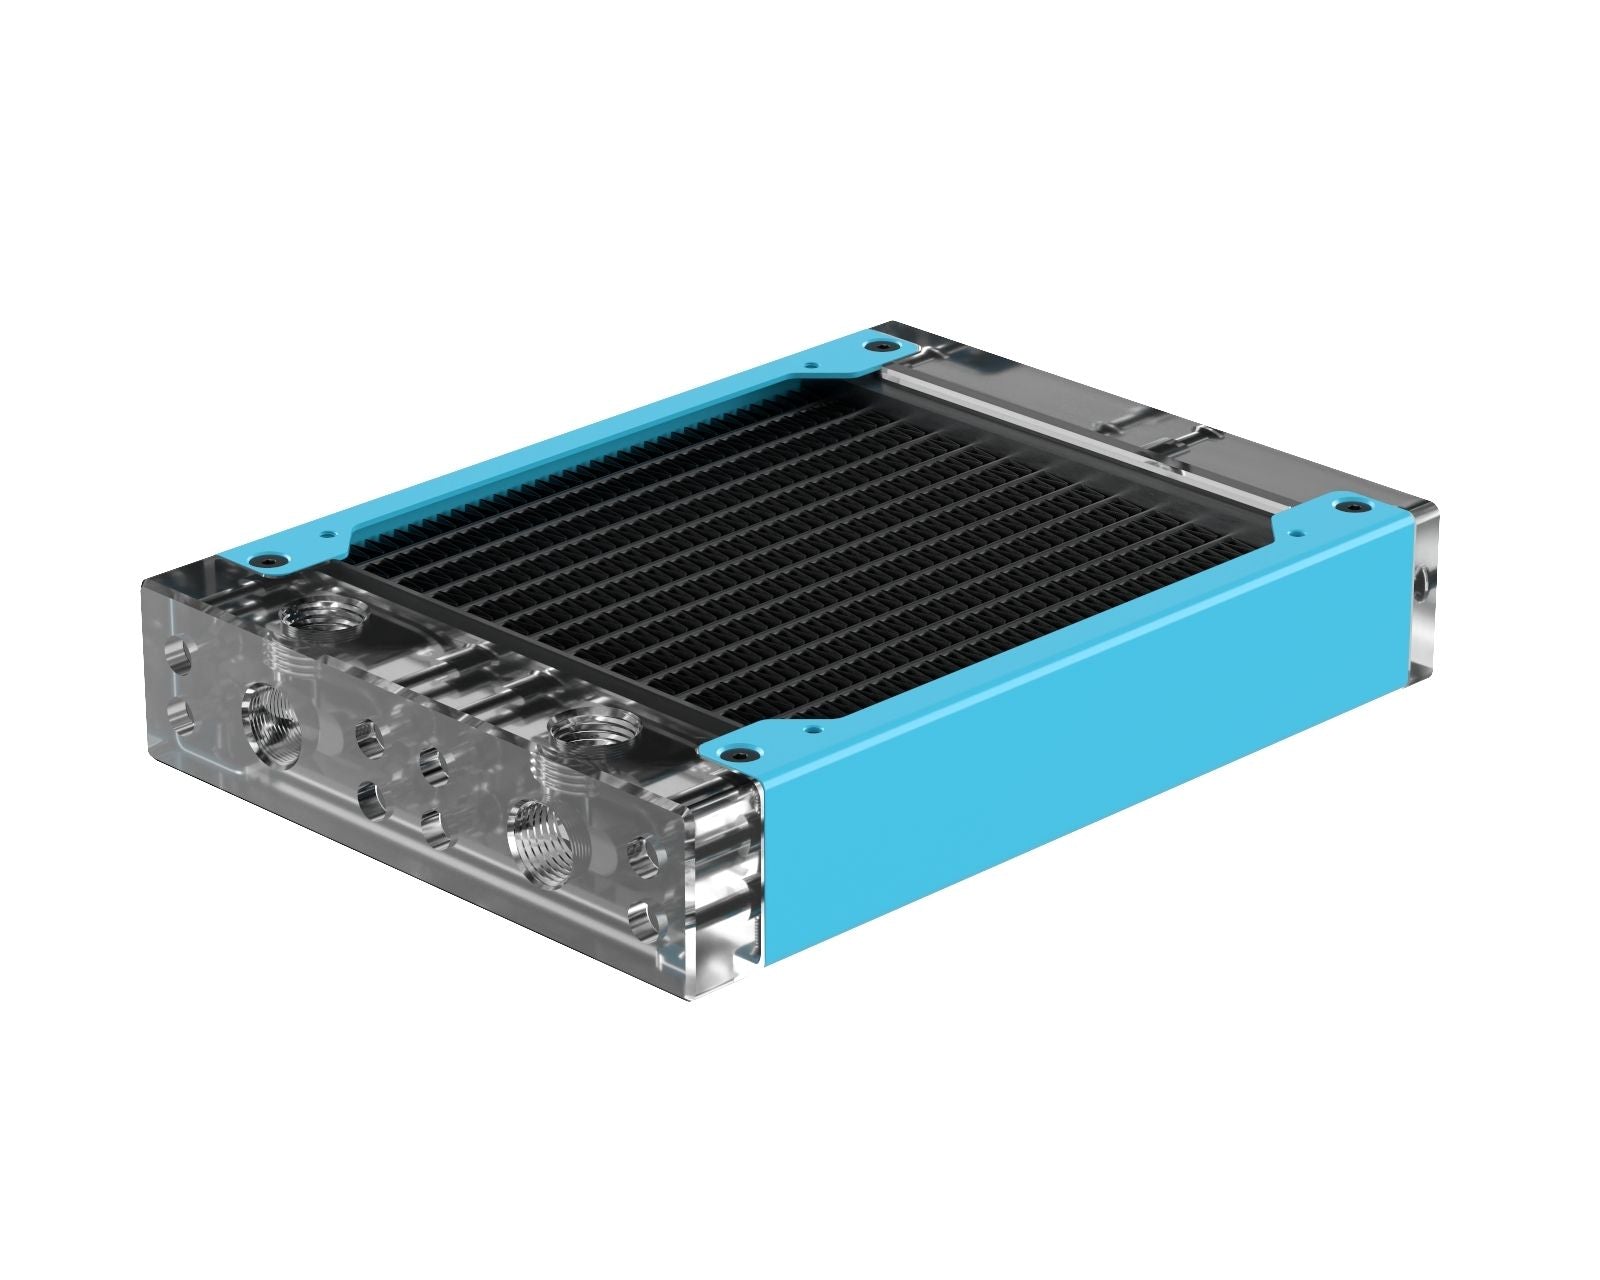 PrimoChill 120SL (30mm) EXIMO Modular Radiator, Clear Acrylic, 1x120mm, Single Fan (R-SL-A12) Available in 20+ Colors, Assembled in USA and Custom Watercooling Loop Ready - Sky Blue